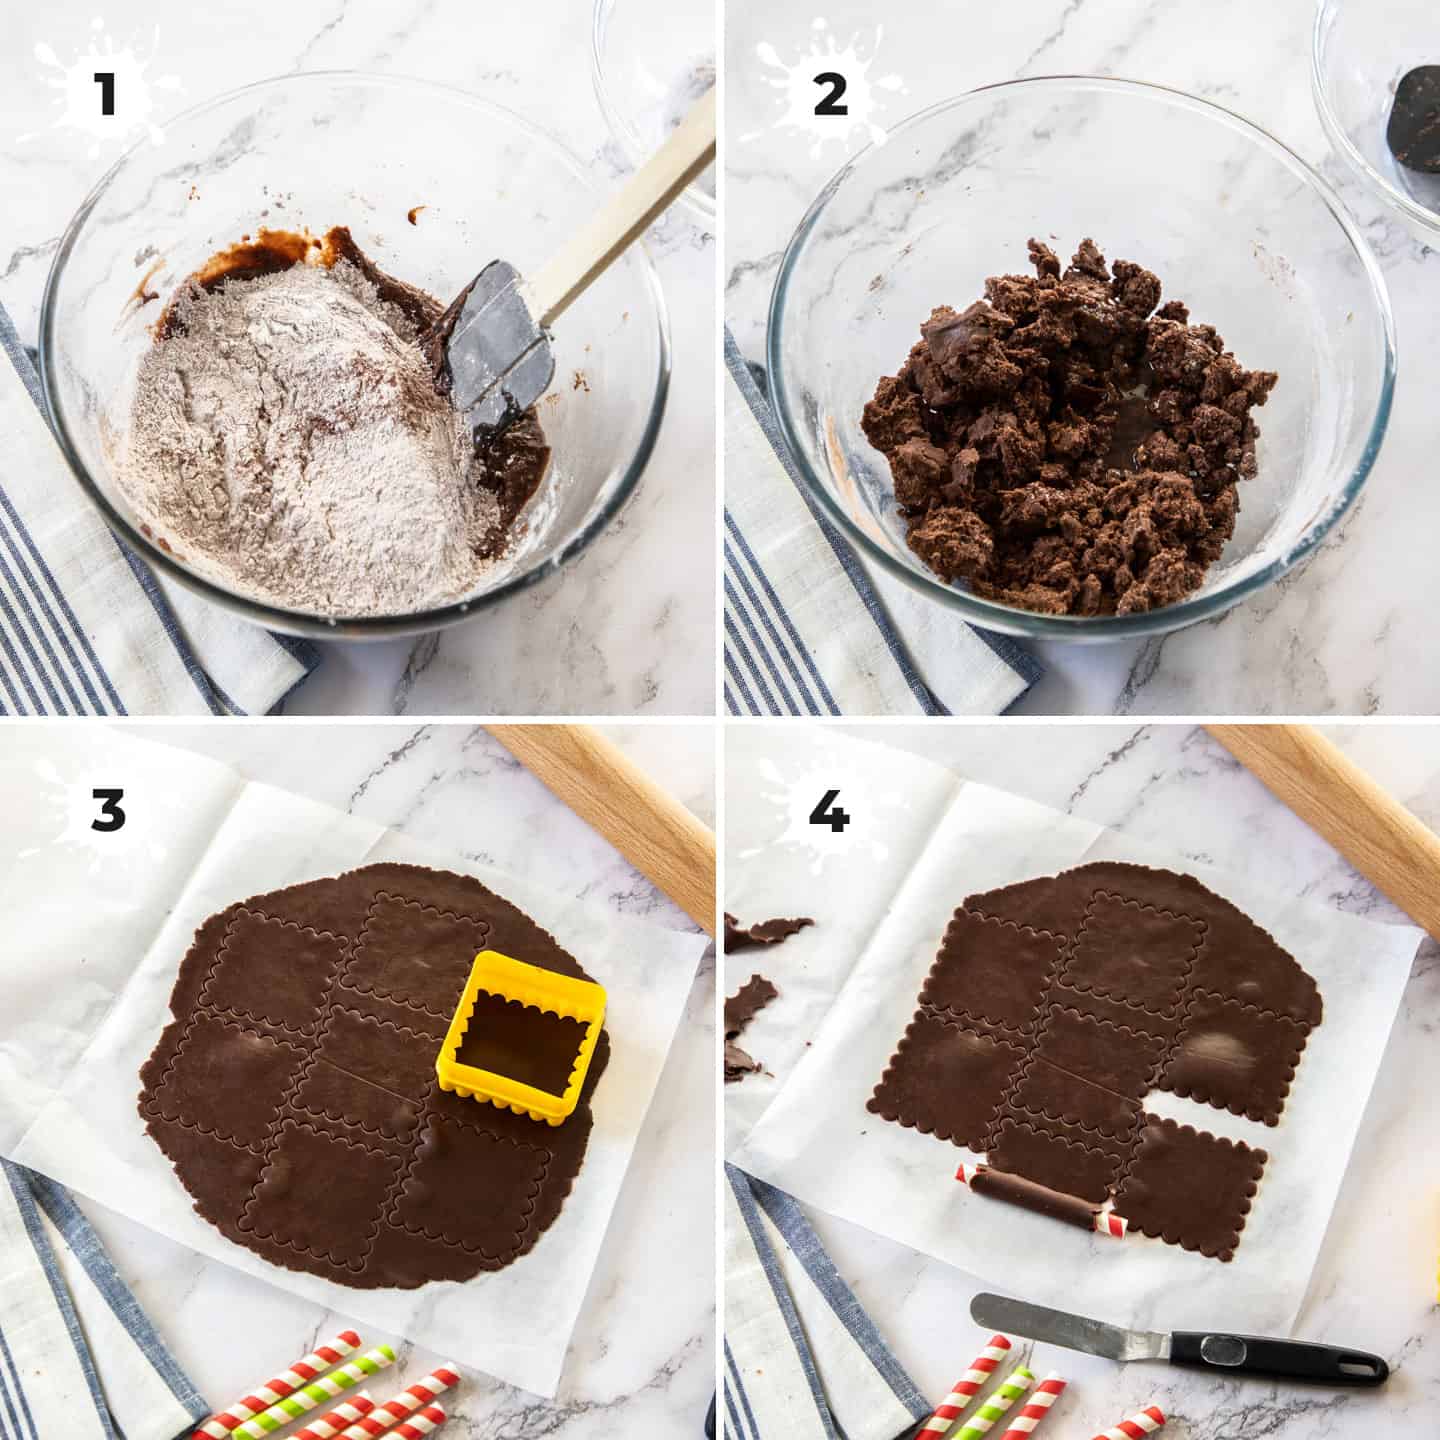 A collage of 4 images showing how to make the cookie dough and roll it out.